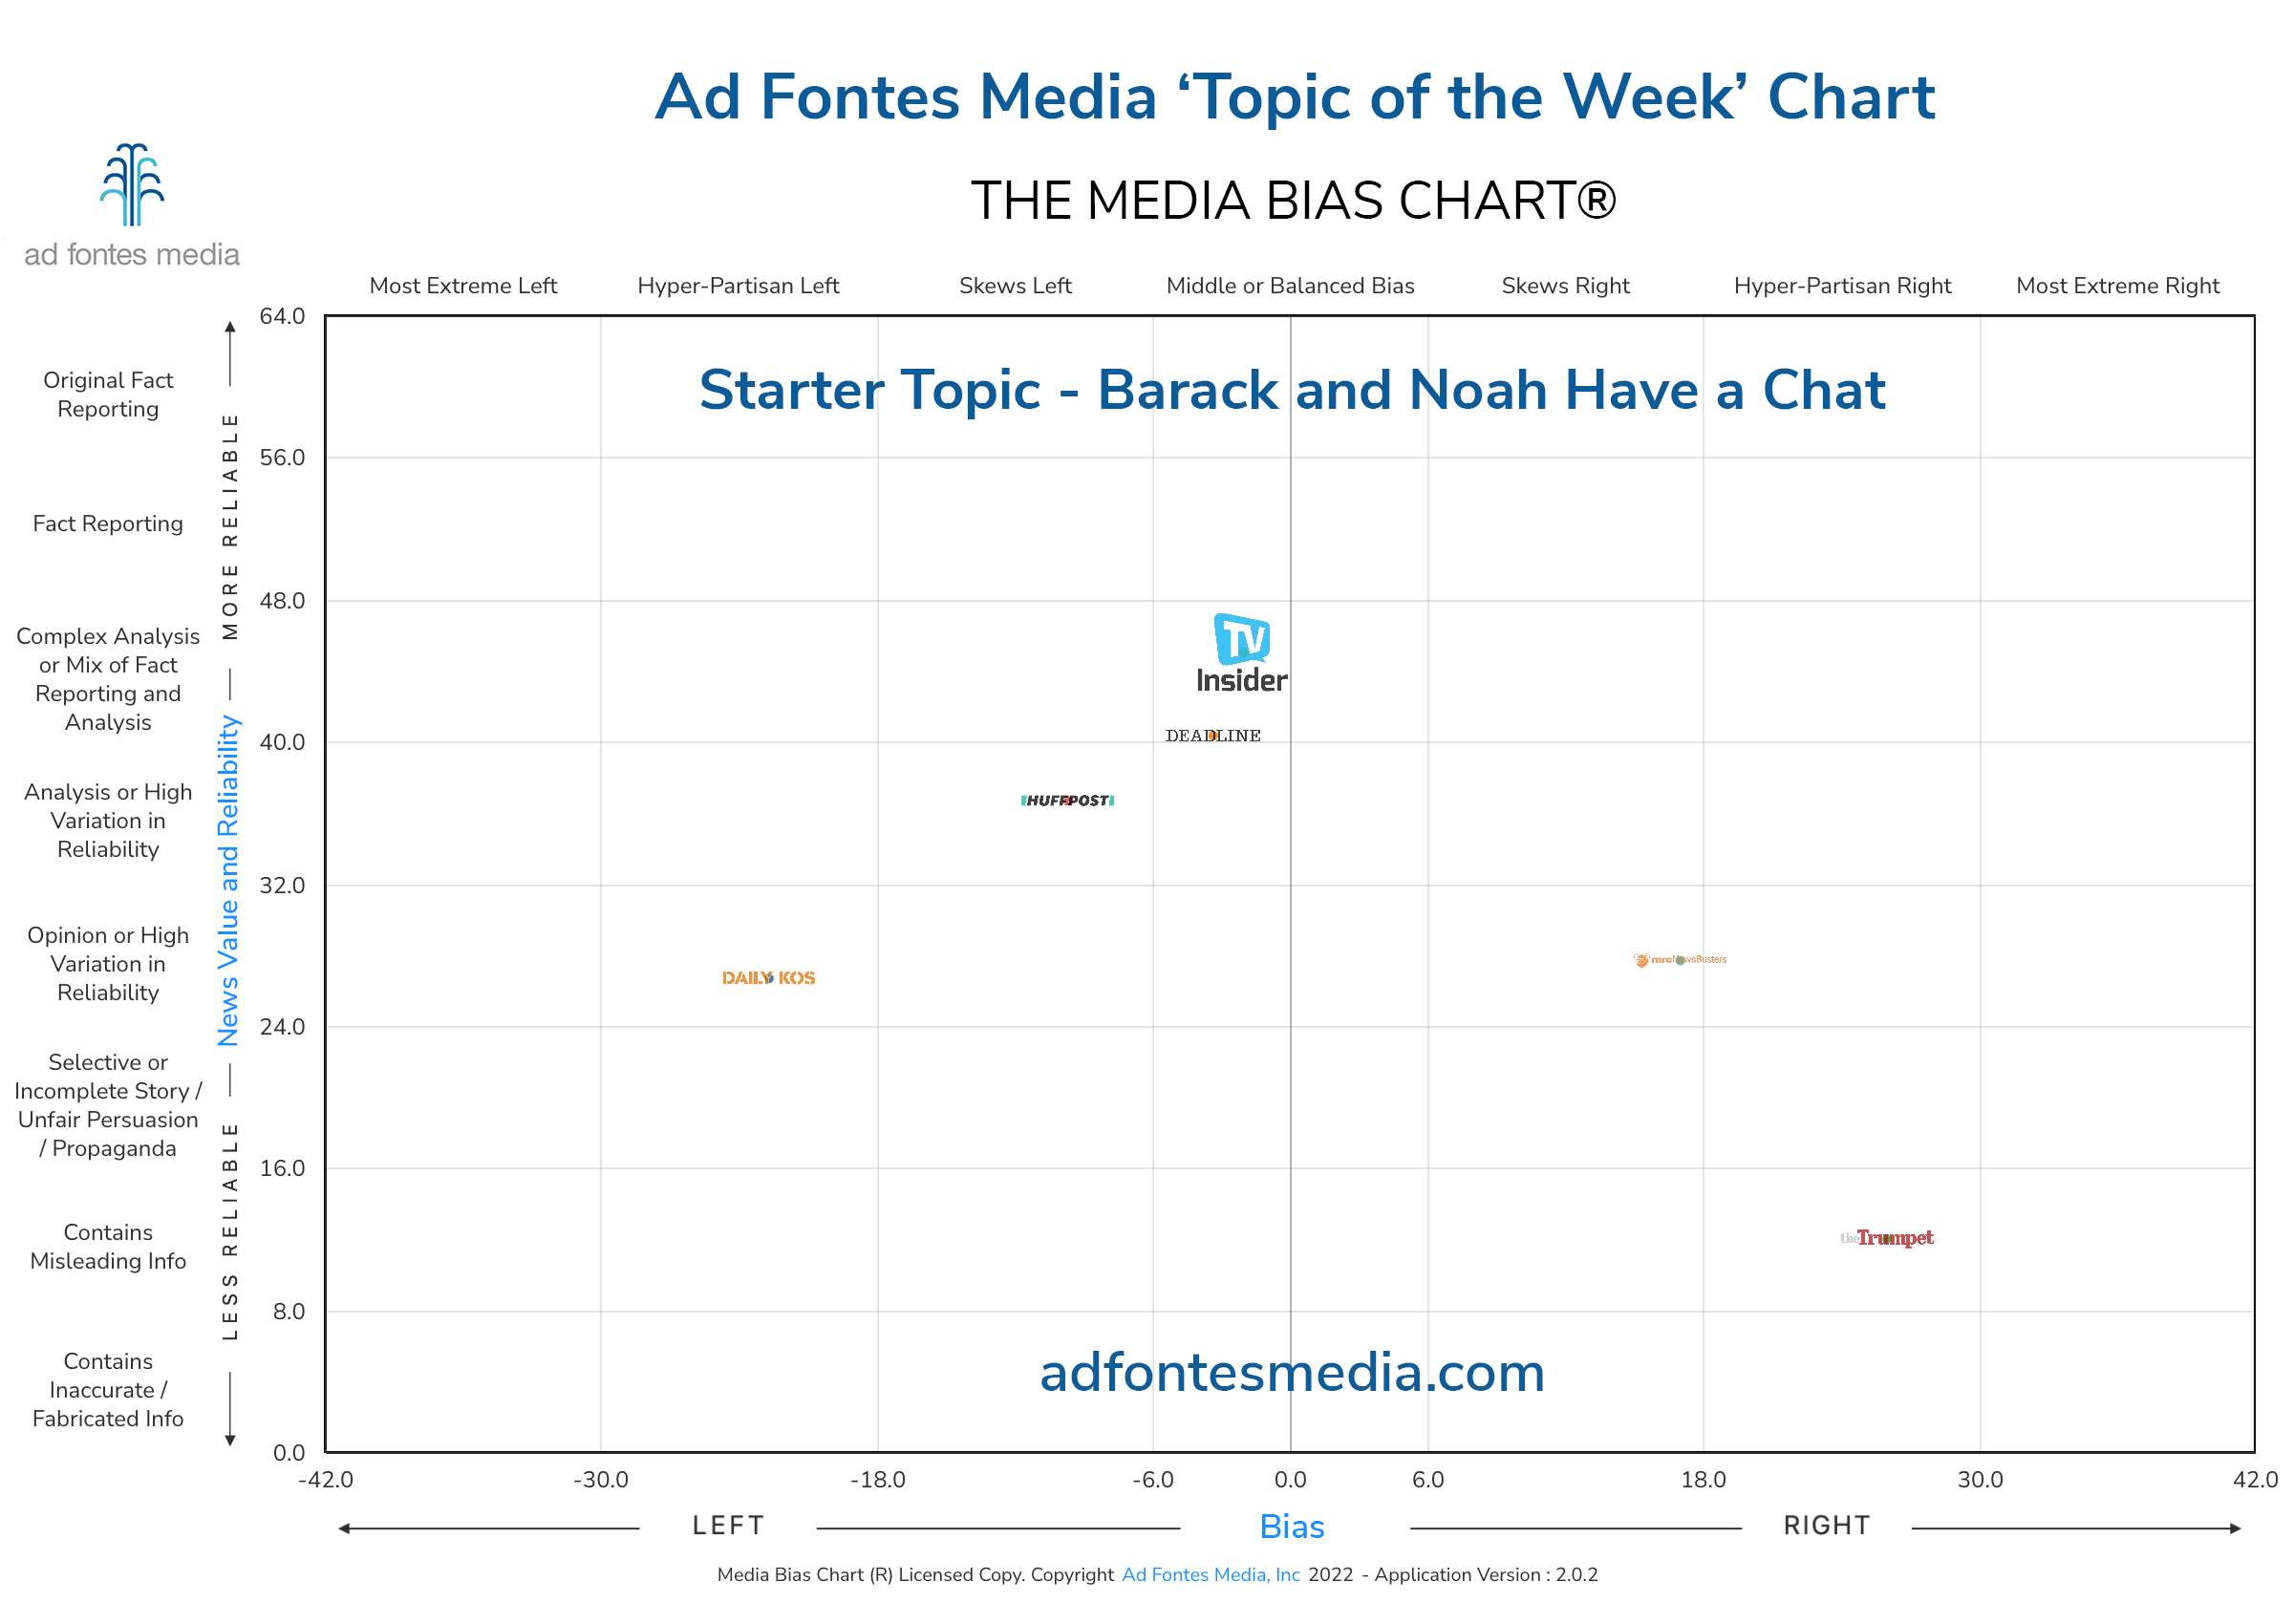 Scores of the Barack and Noah Have a Chat articles on the chart